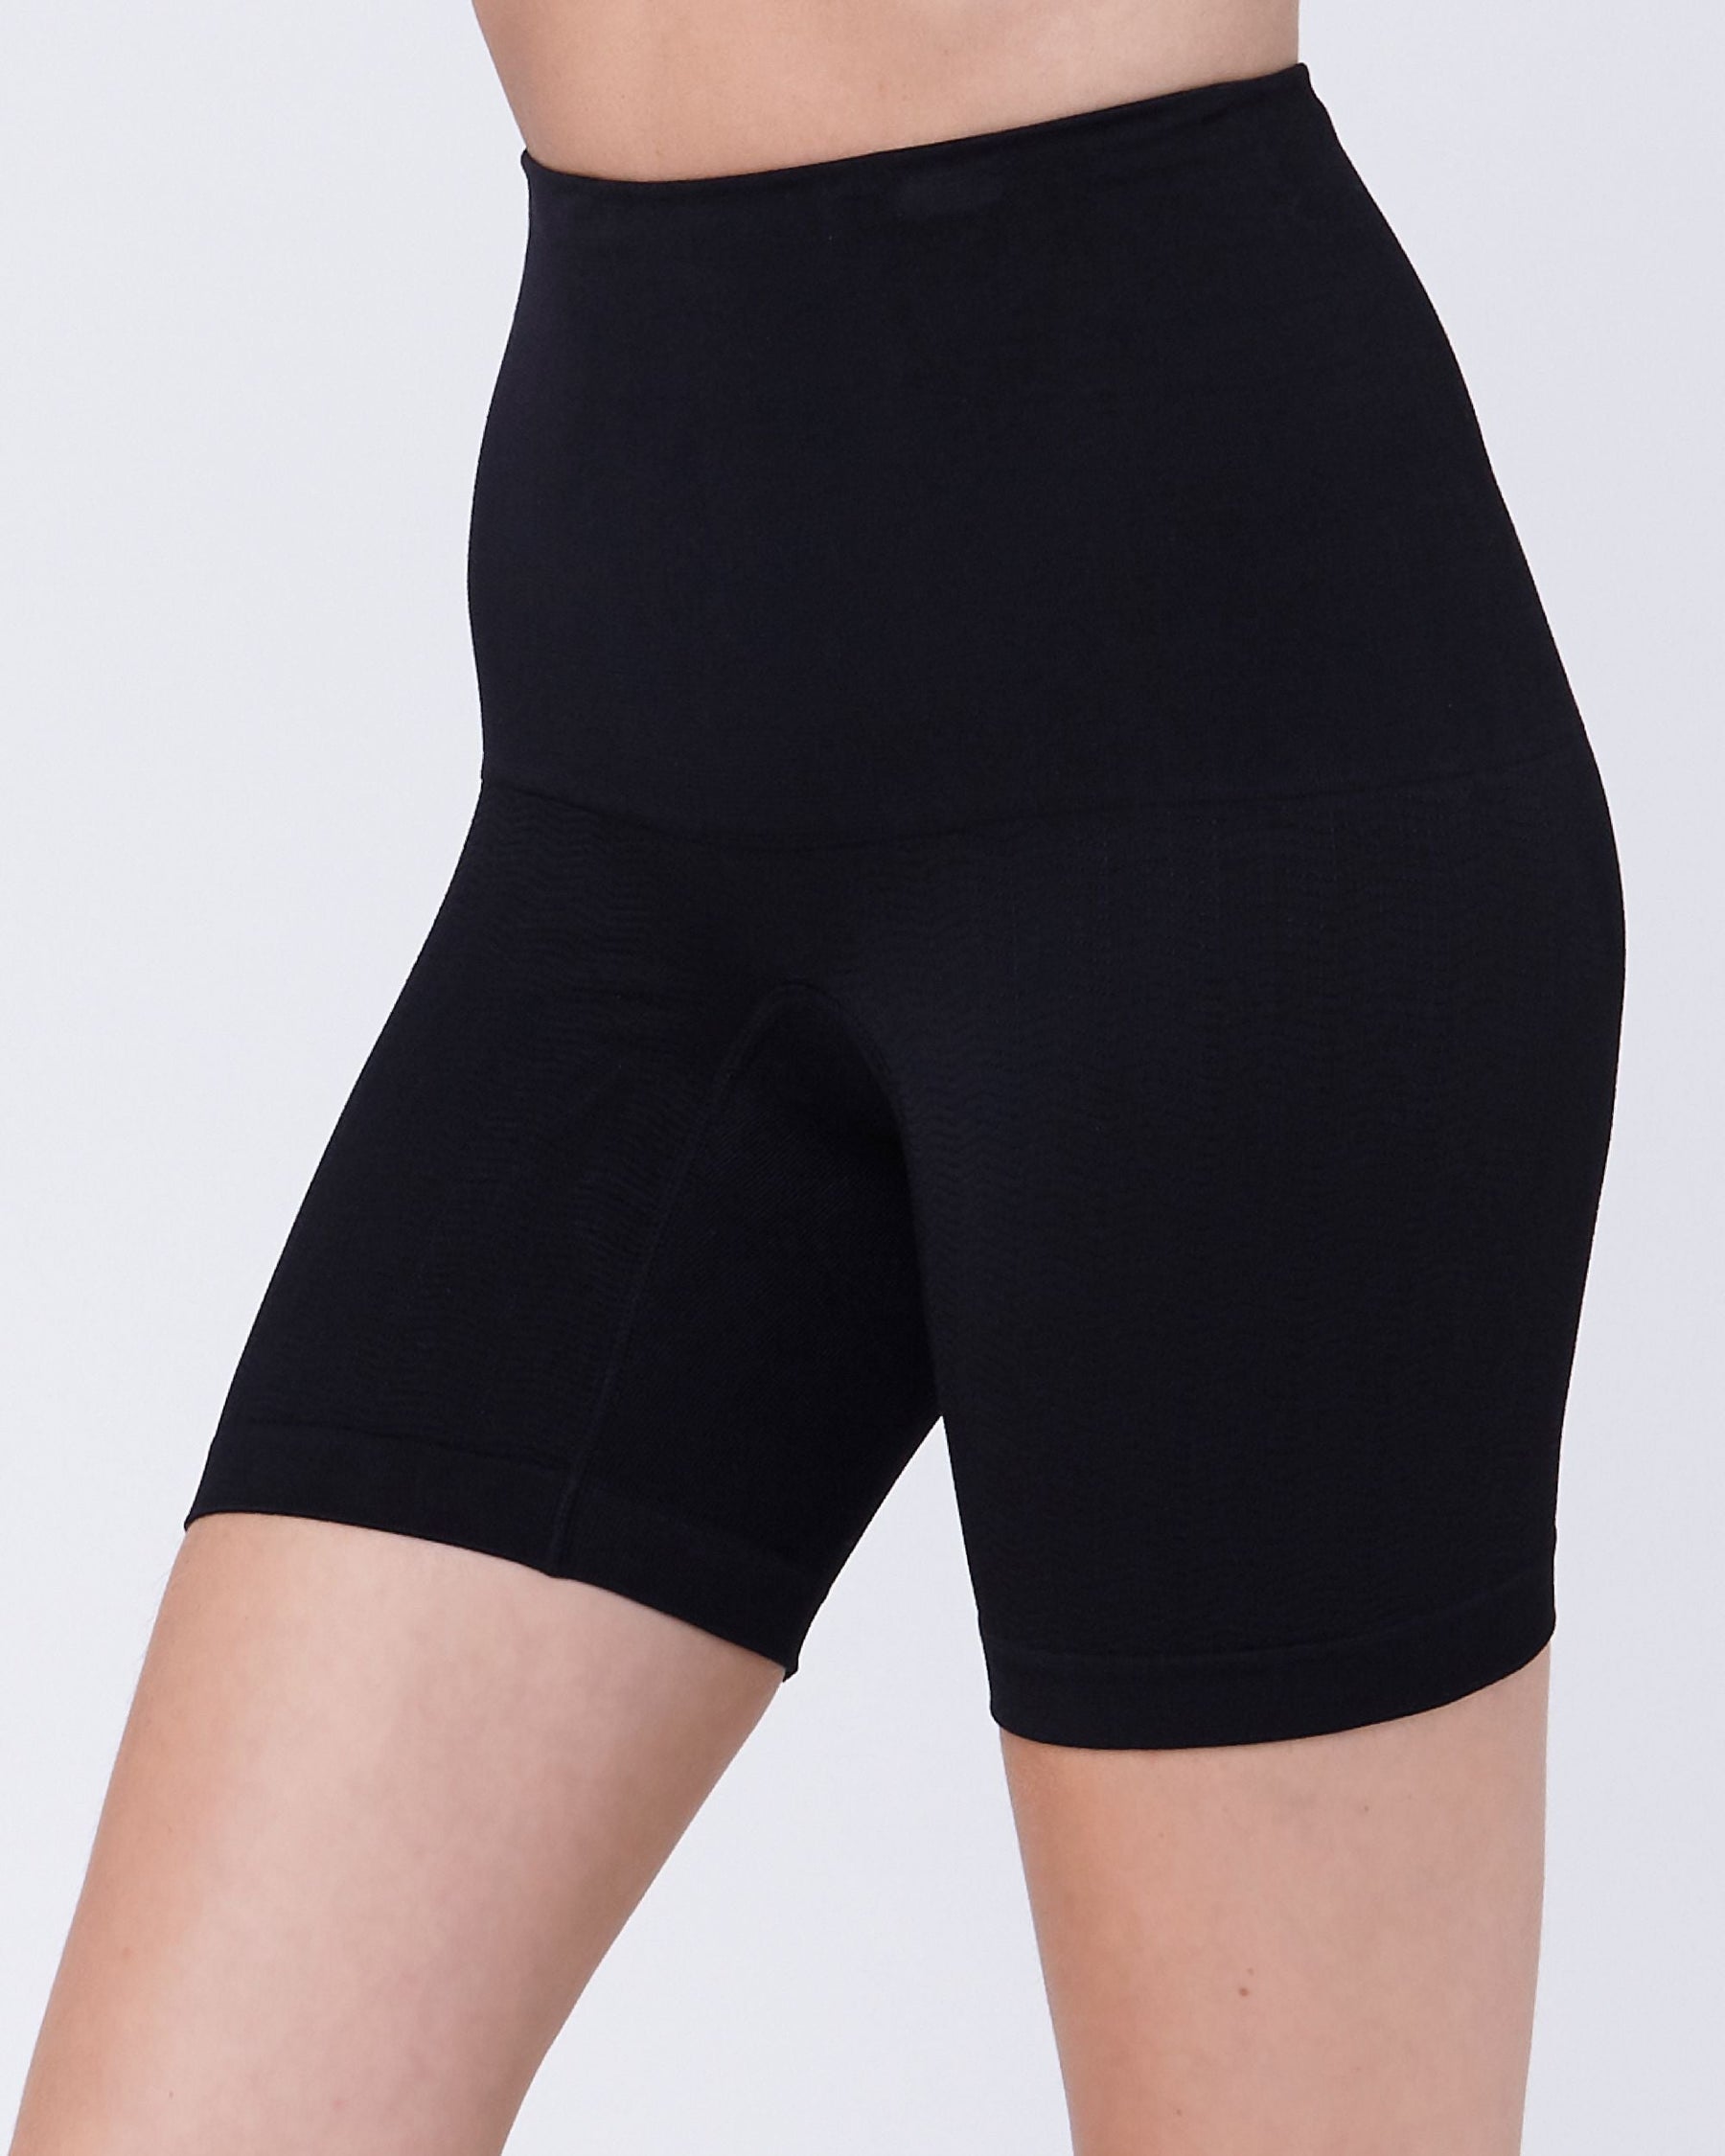 Recovery Compression Shorts - Black